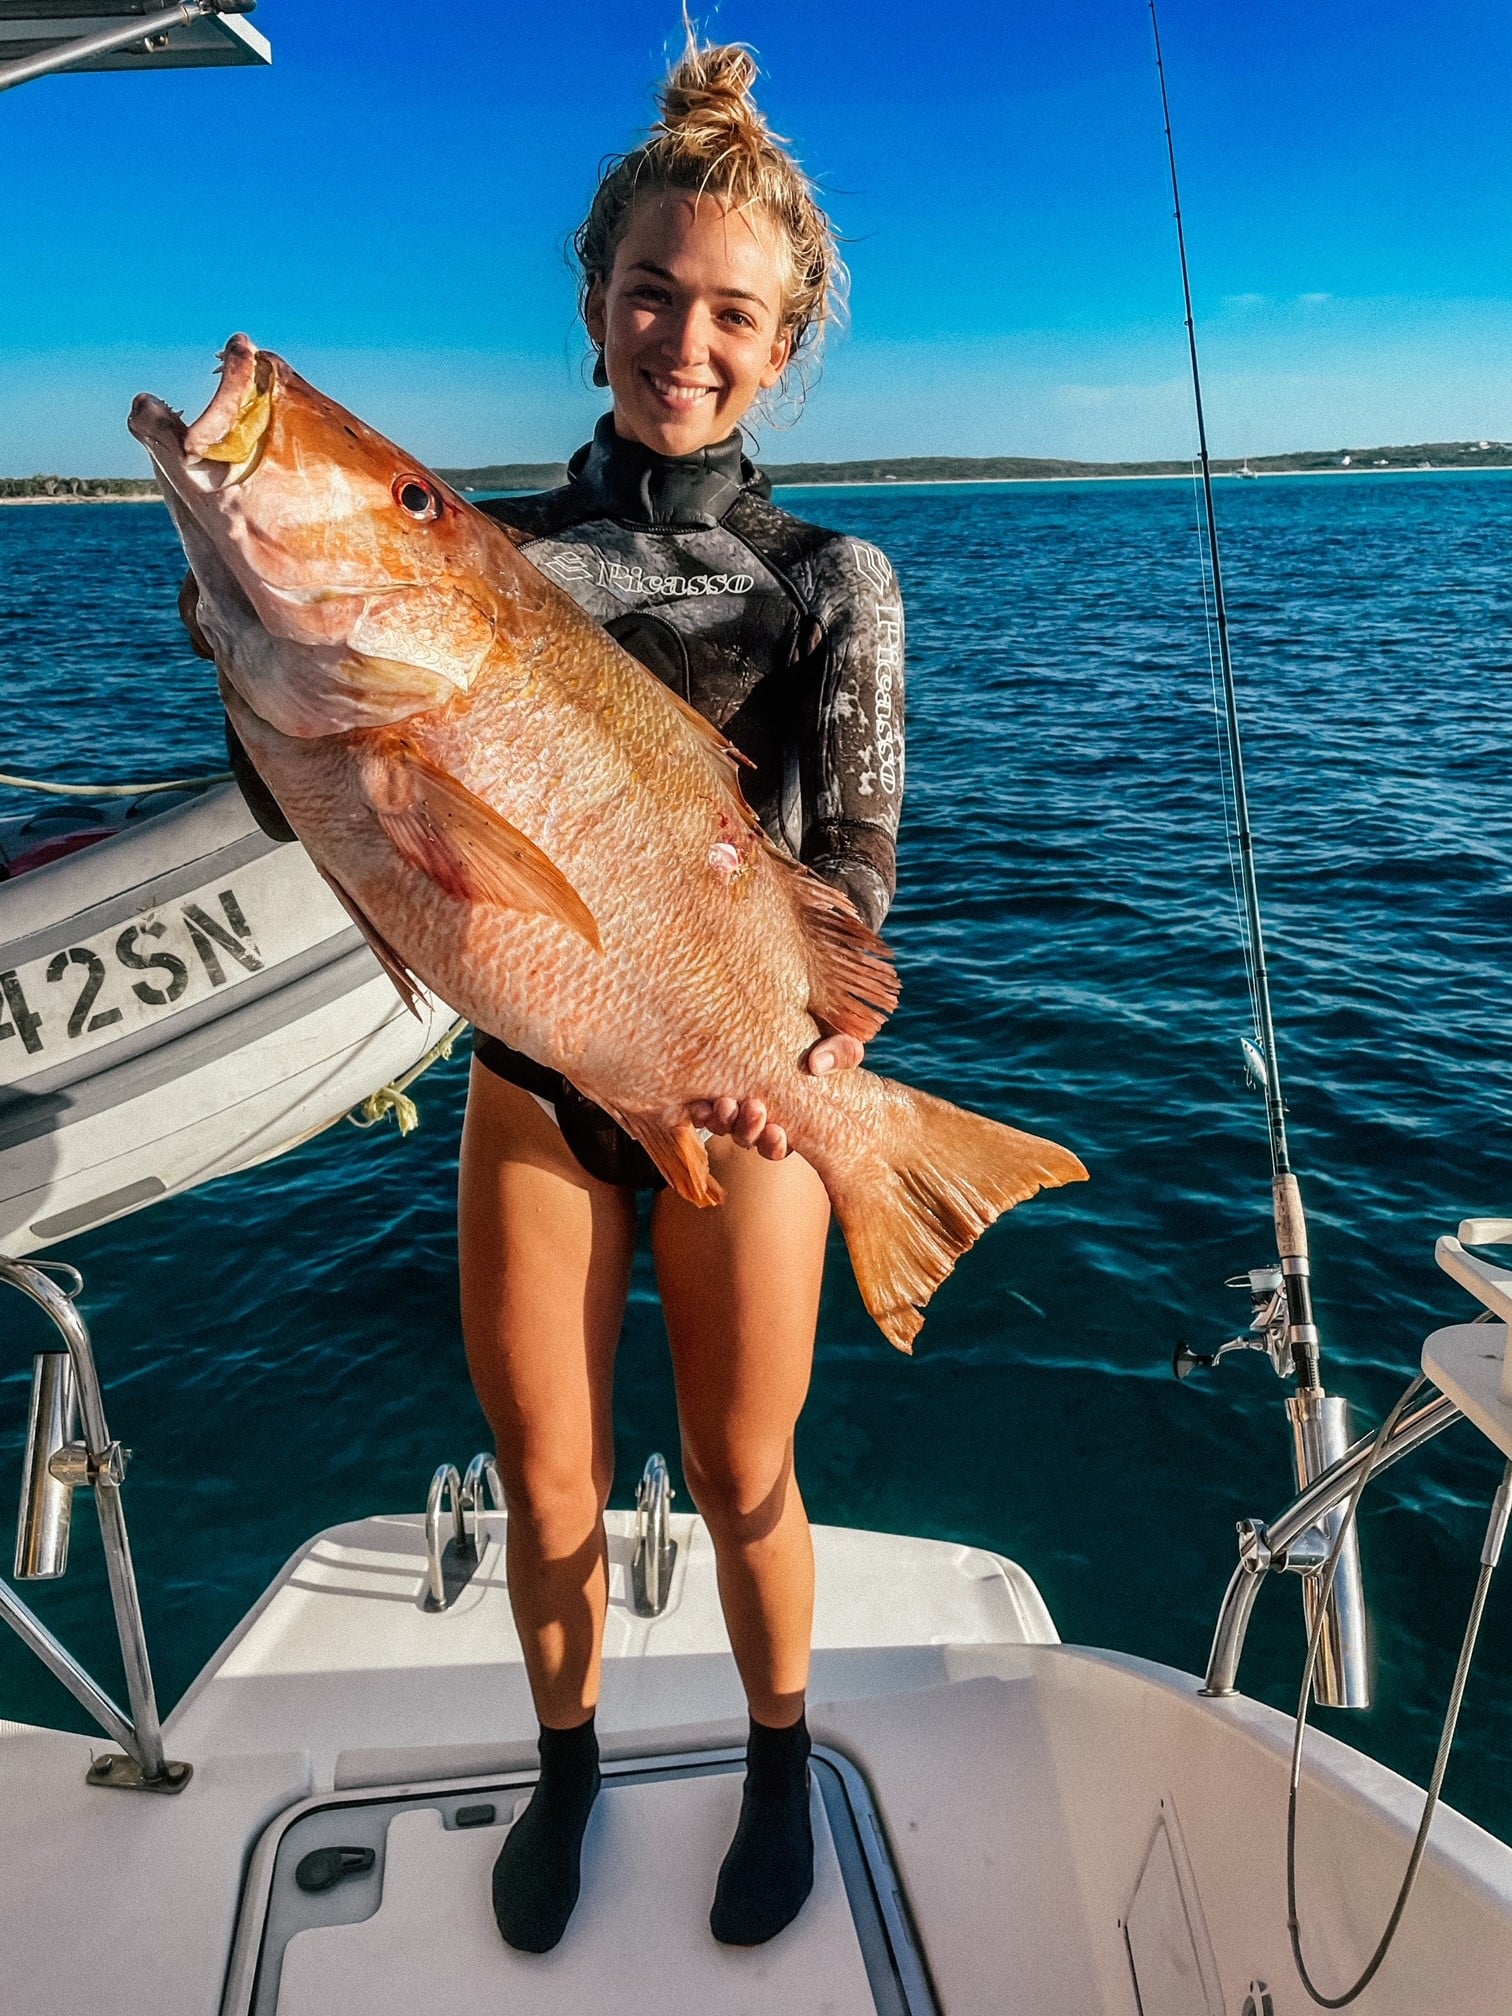 Sascha Meyers holding a large fish on a boat